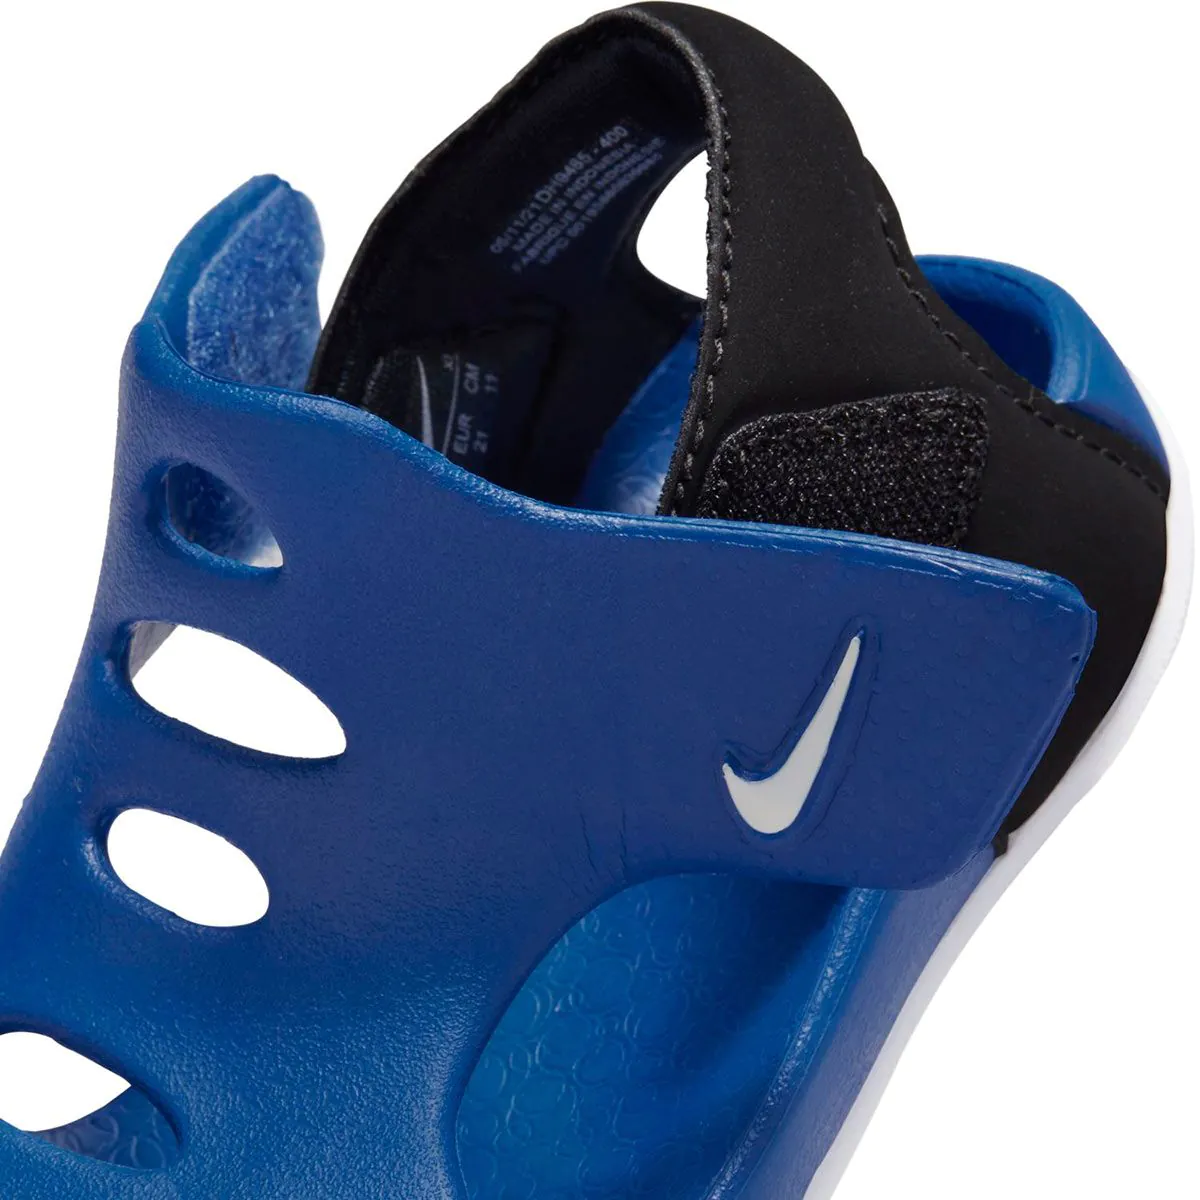 Nike Sunray Protect 3 Toddler Sandals DH9465-400